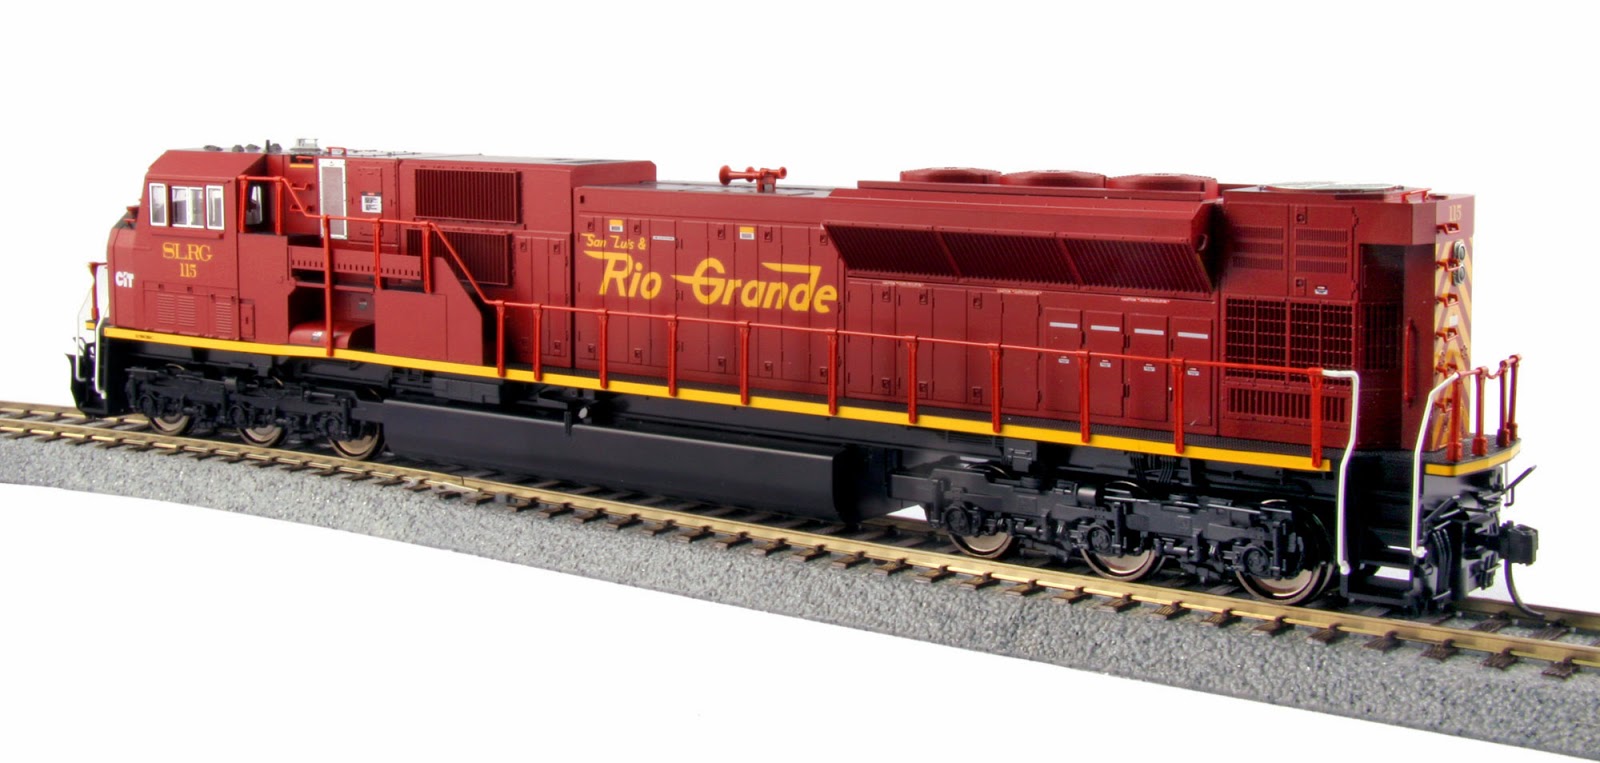 Like all famous leaders, locomotives come with distinctive and 